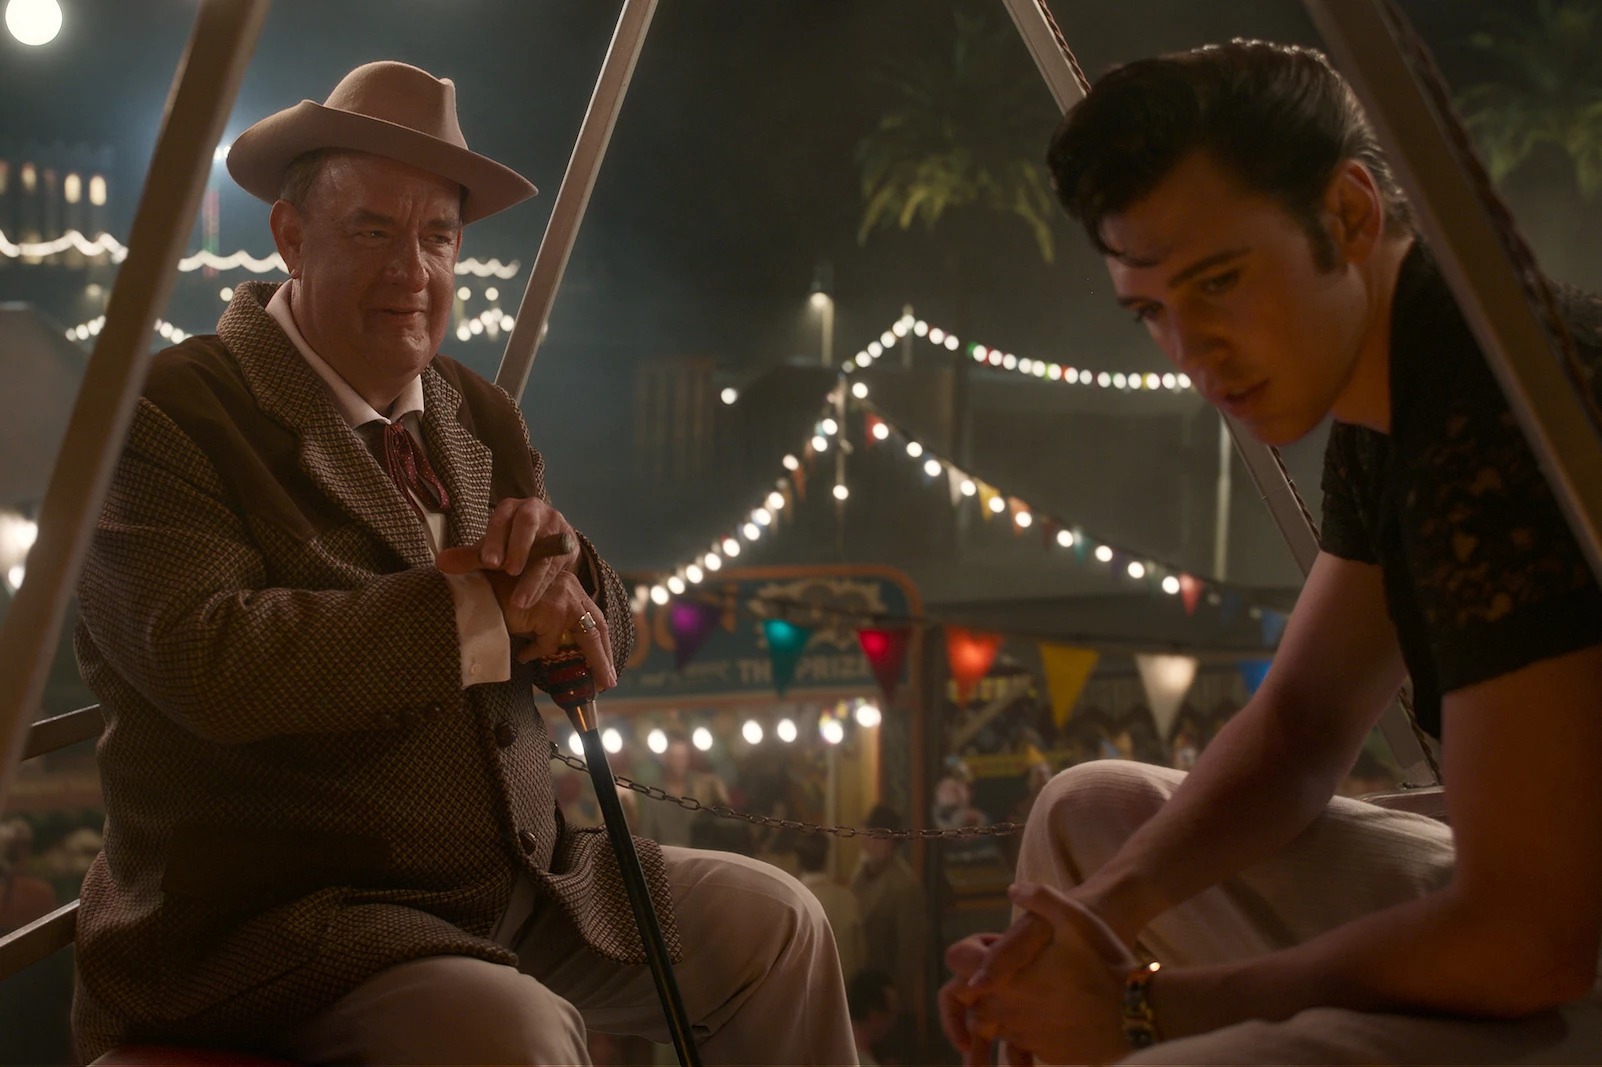 Elvis' Review: Baz Luhrmann Gets Caught in a Biopic Trap